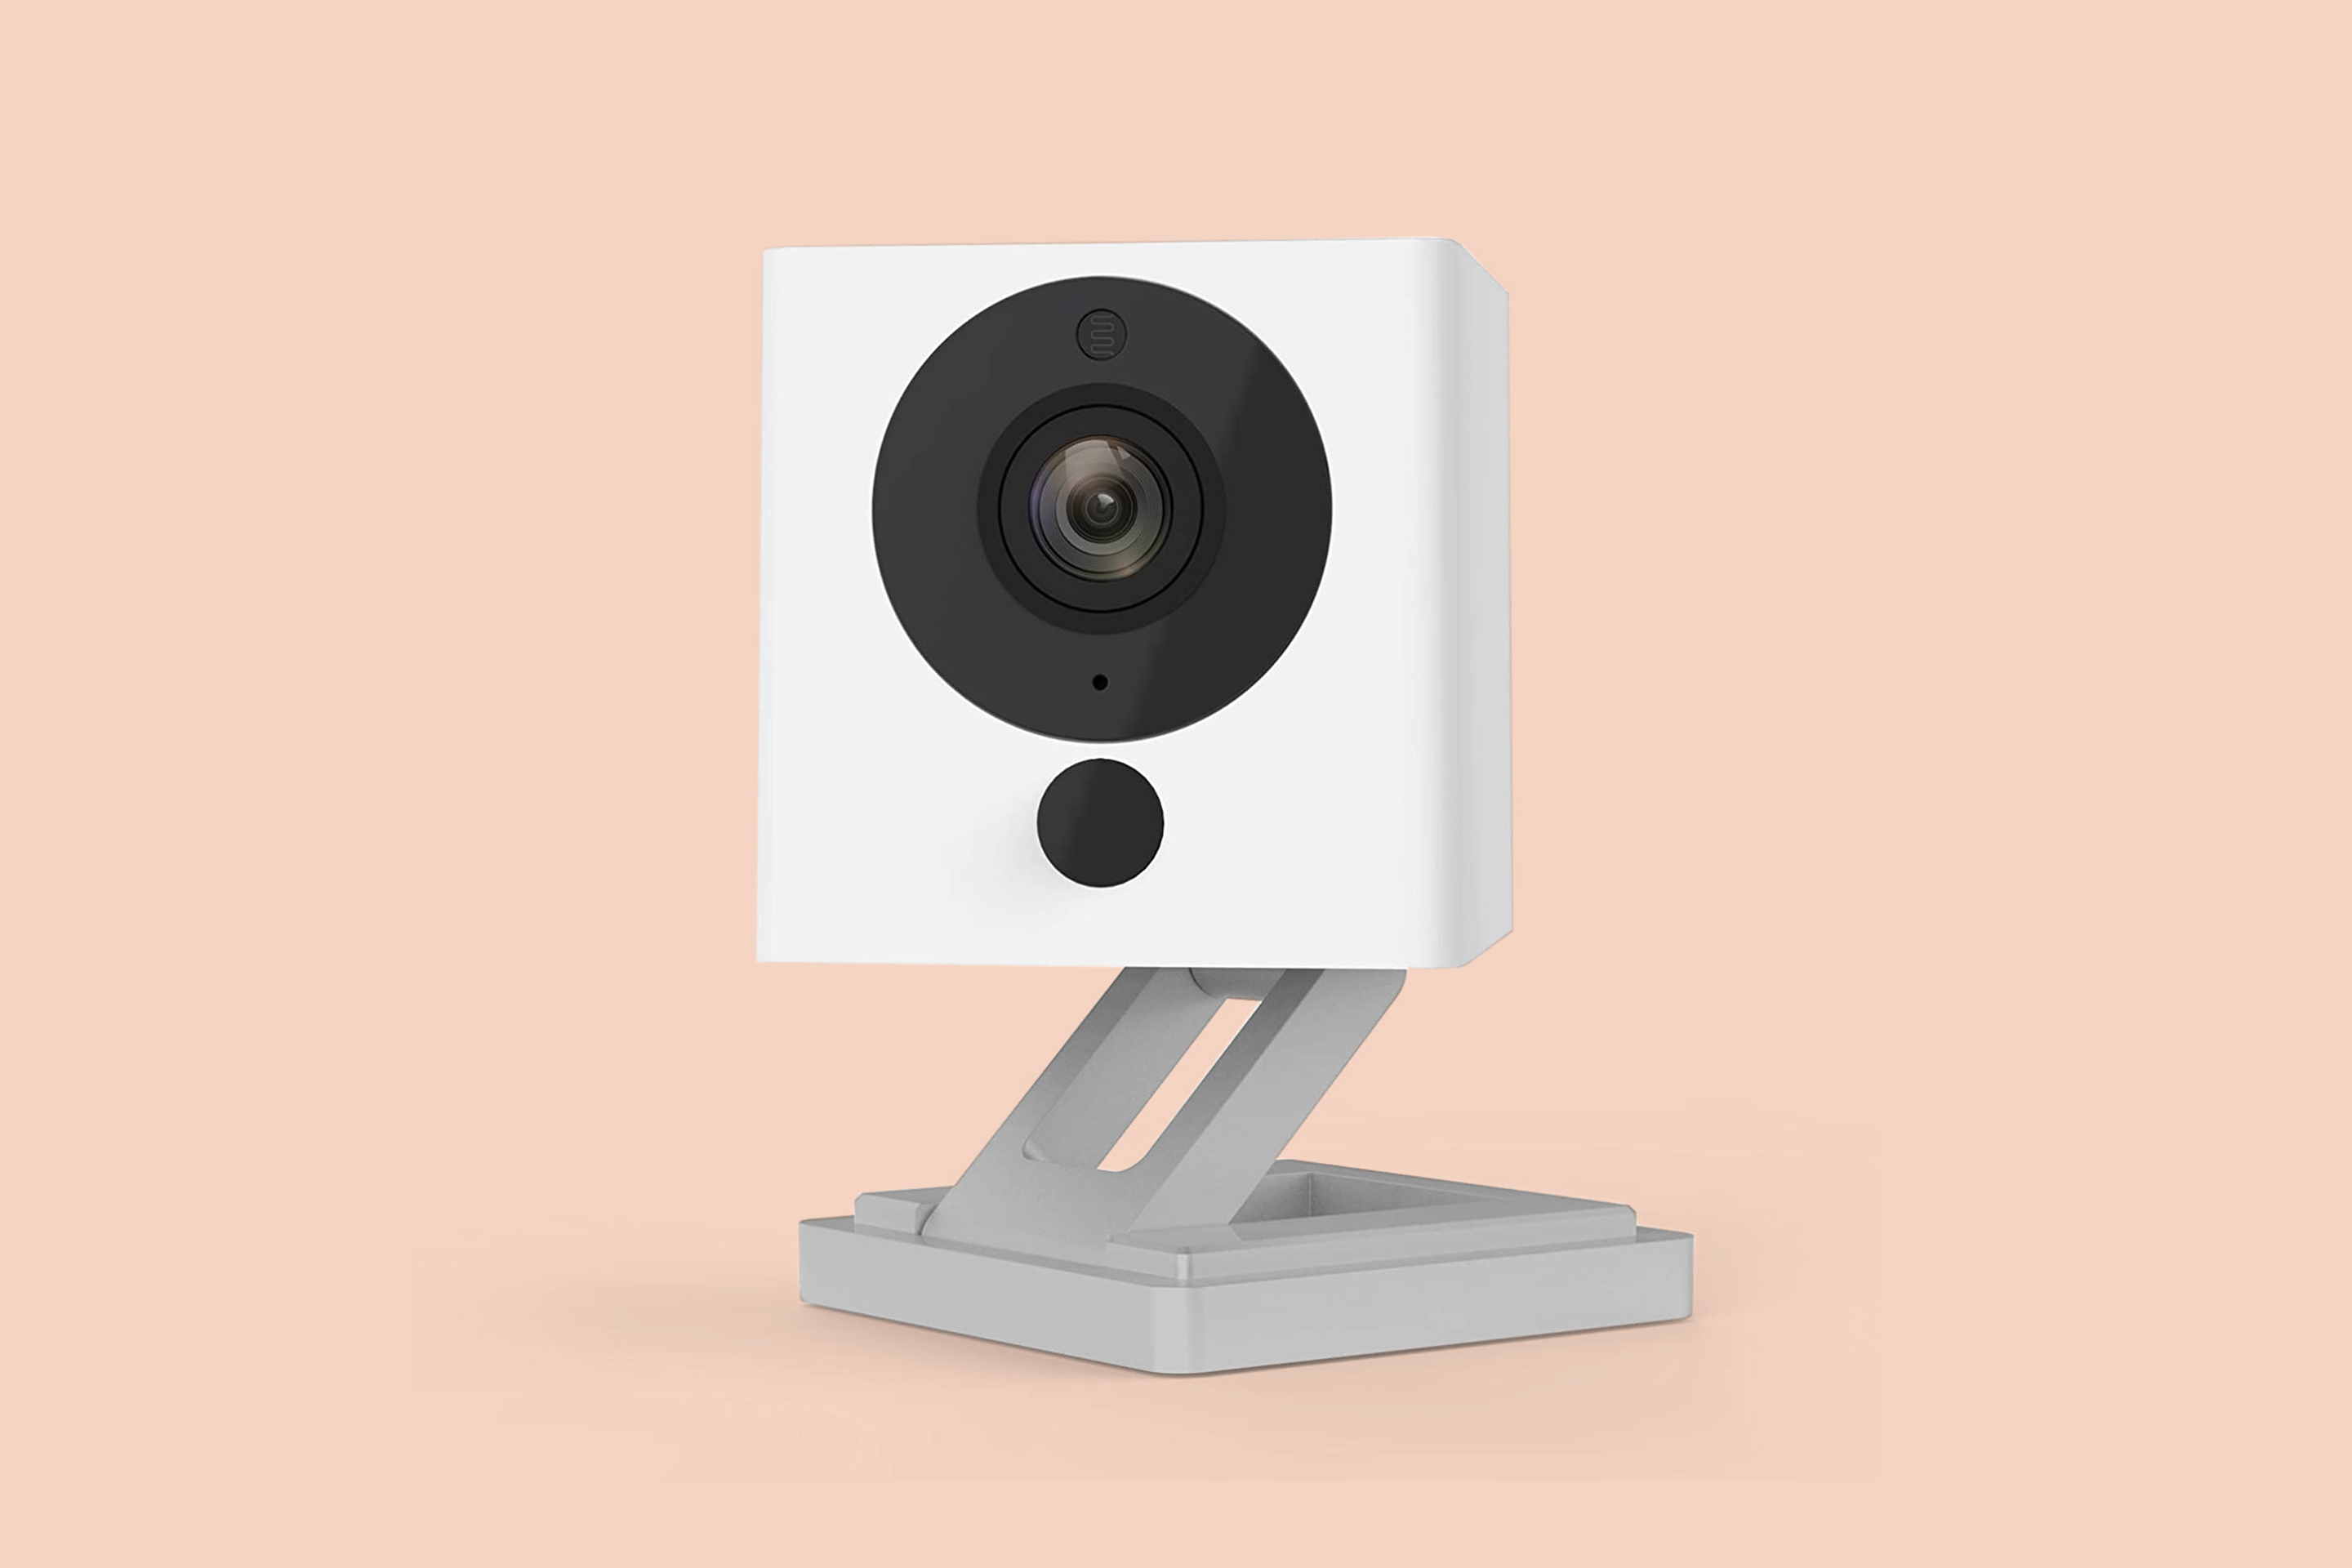 best value for money security camera